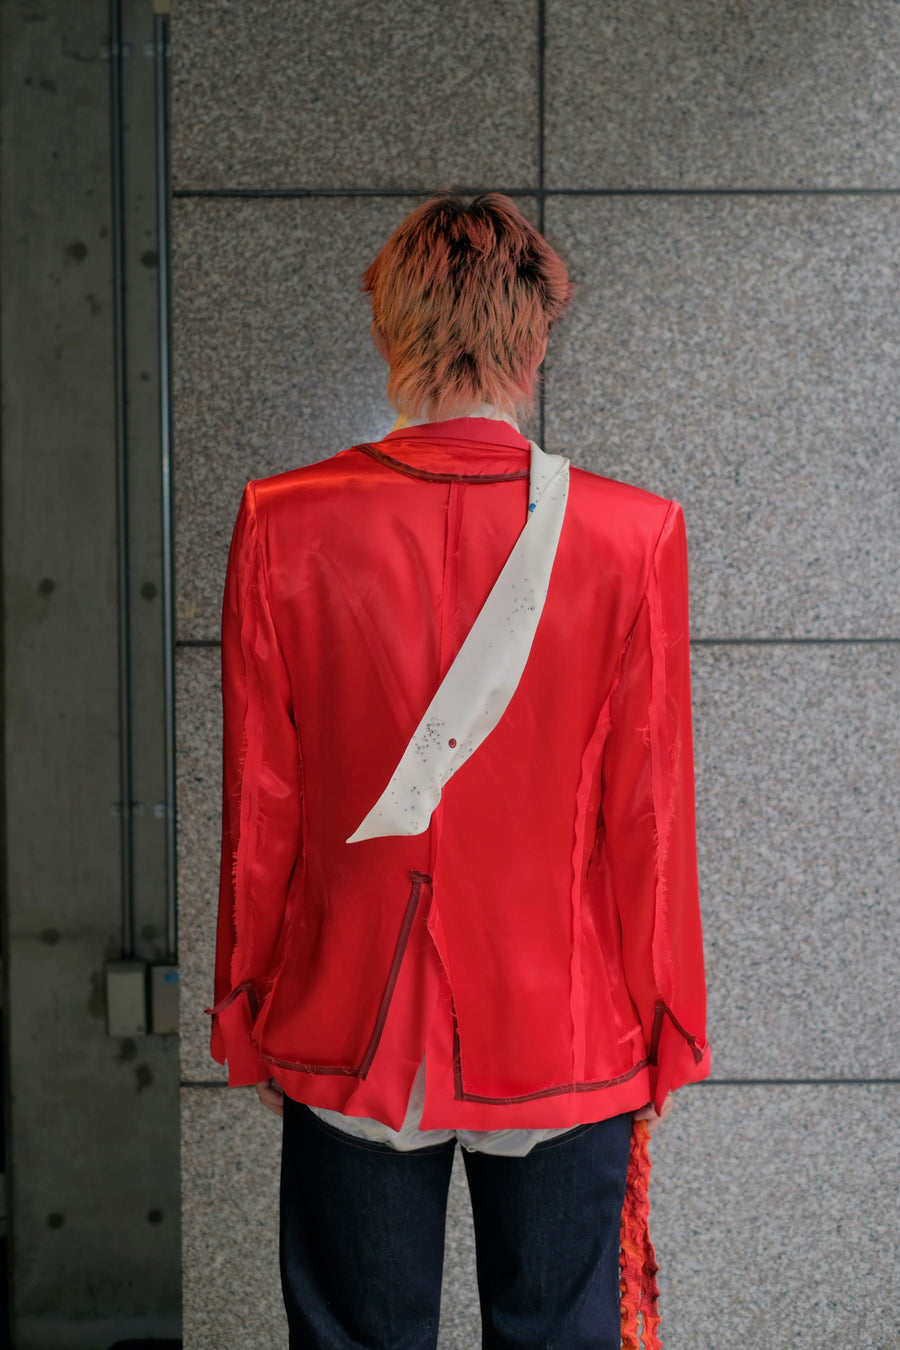 MASU(エムエーエスユー)のINSIDE OUT JACKET REDの通販｜PALETTE art 